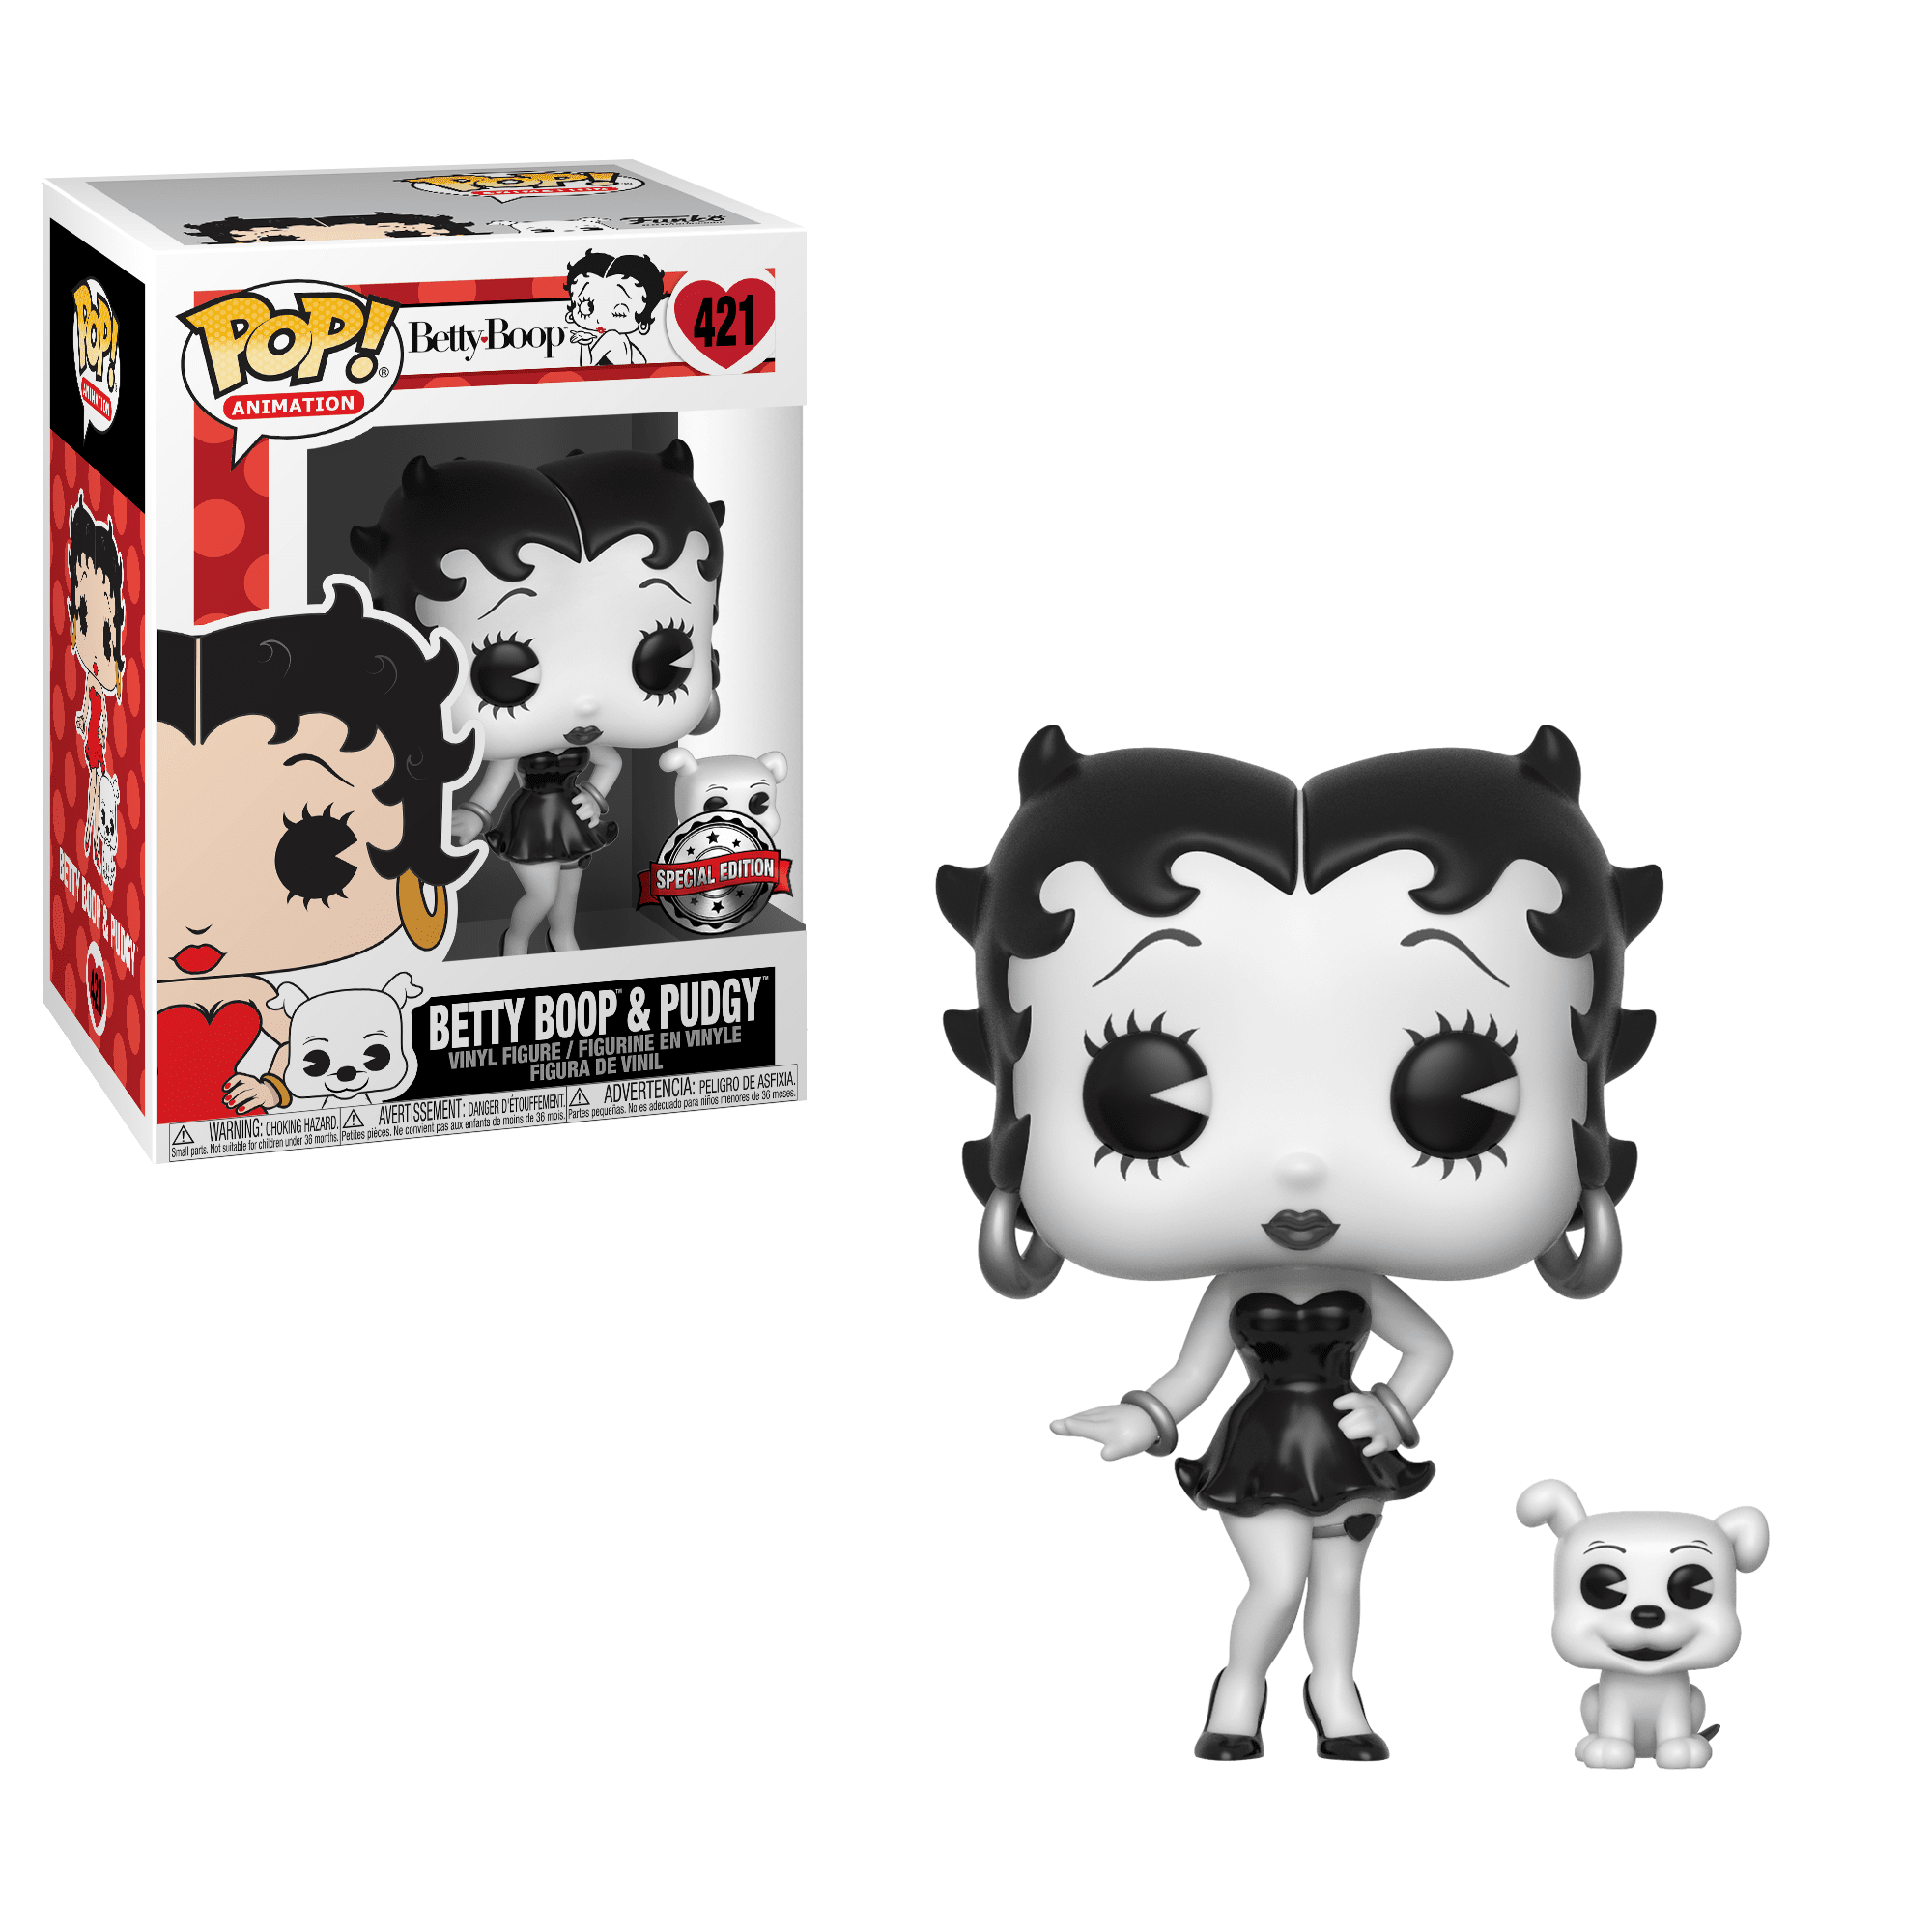 Funko Pop! Betty Boop (w/ Pudgy) (Black and White) (Betty Boop)